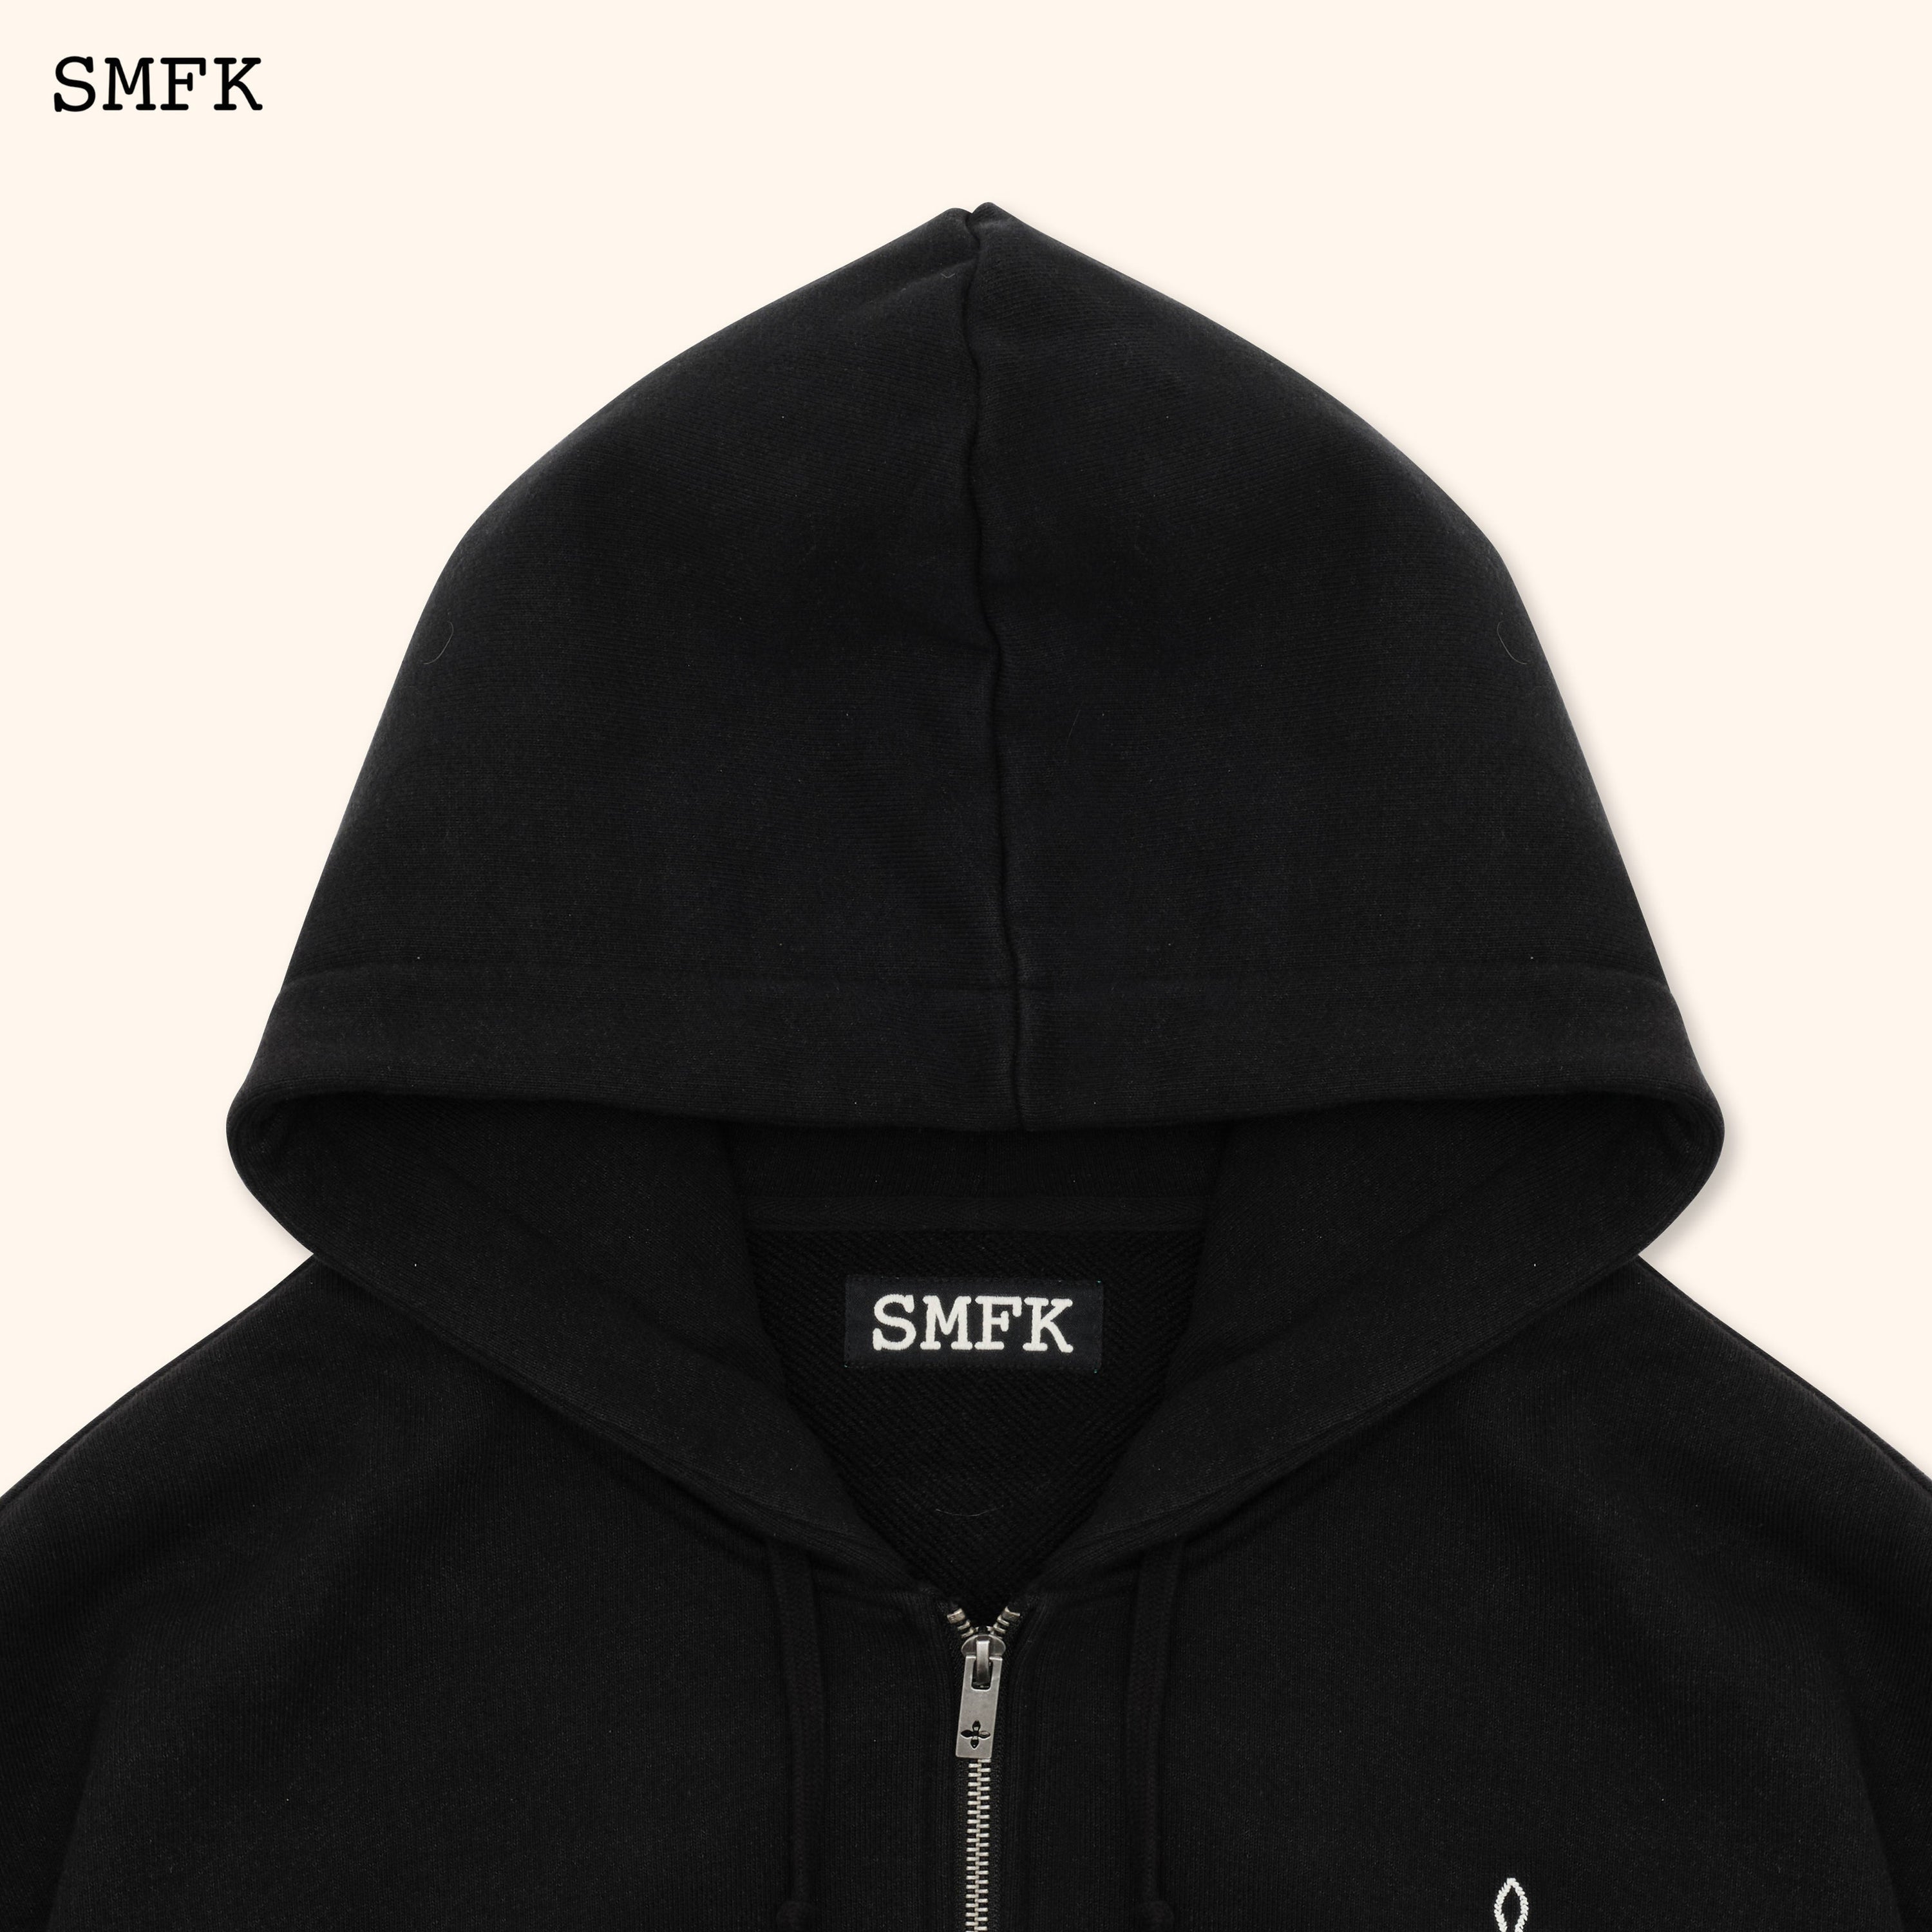 Compass Classic Cross Hoodie Black Jacket - SMFK Official